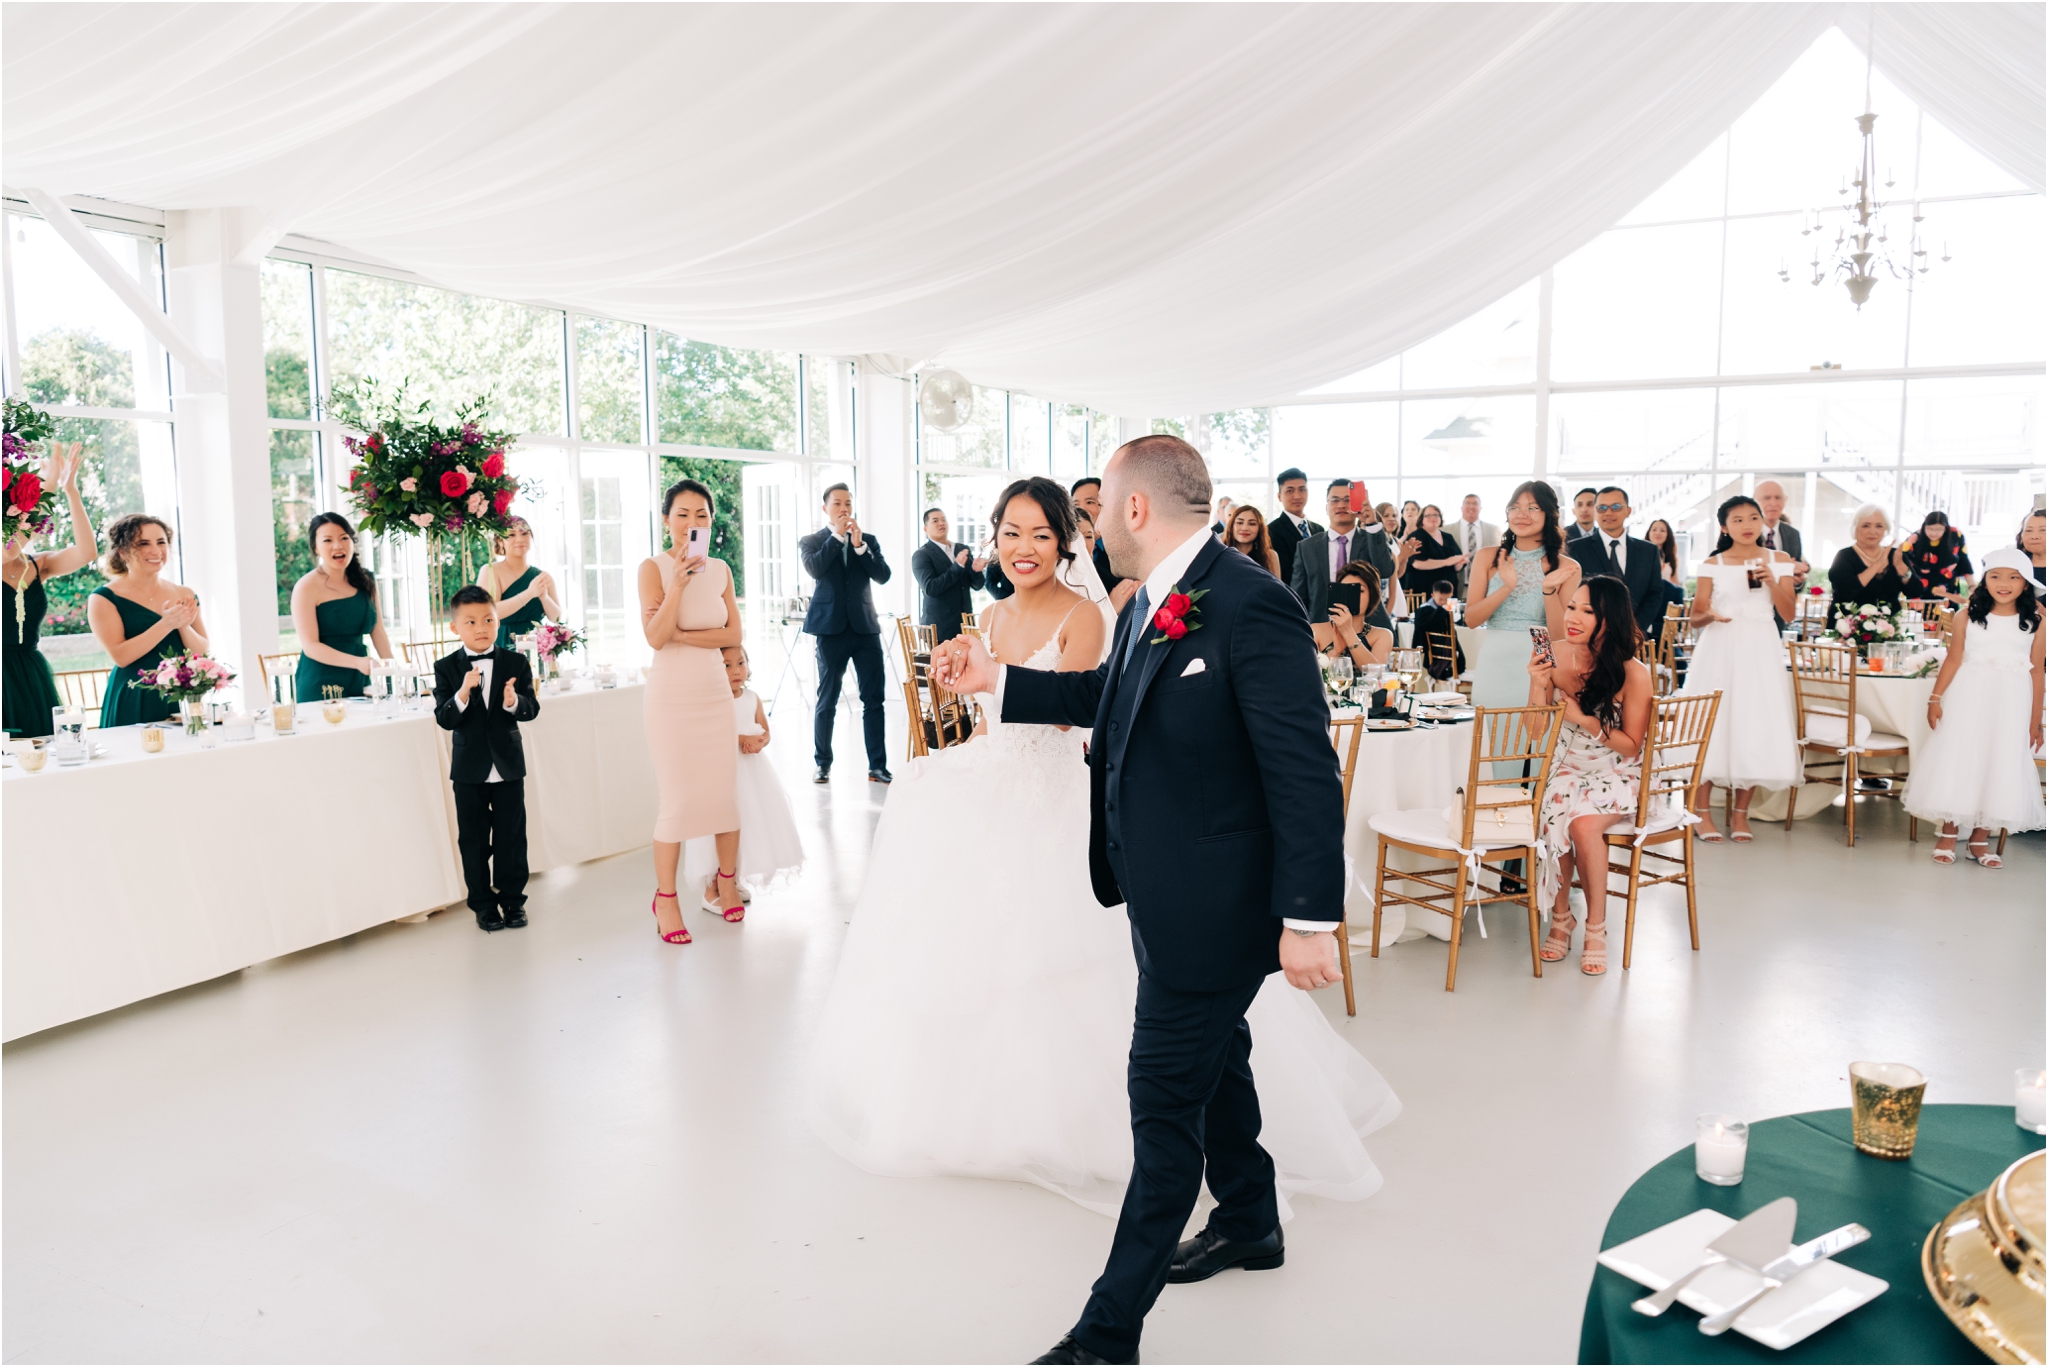 reception introduction of the bride and groom in glass pavilion